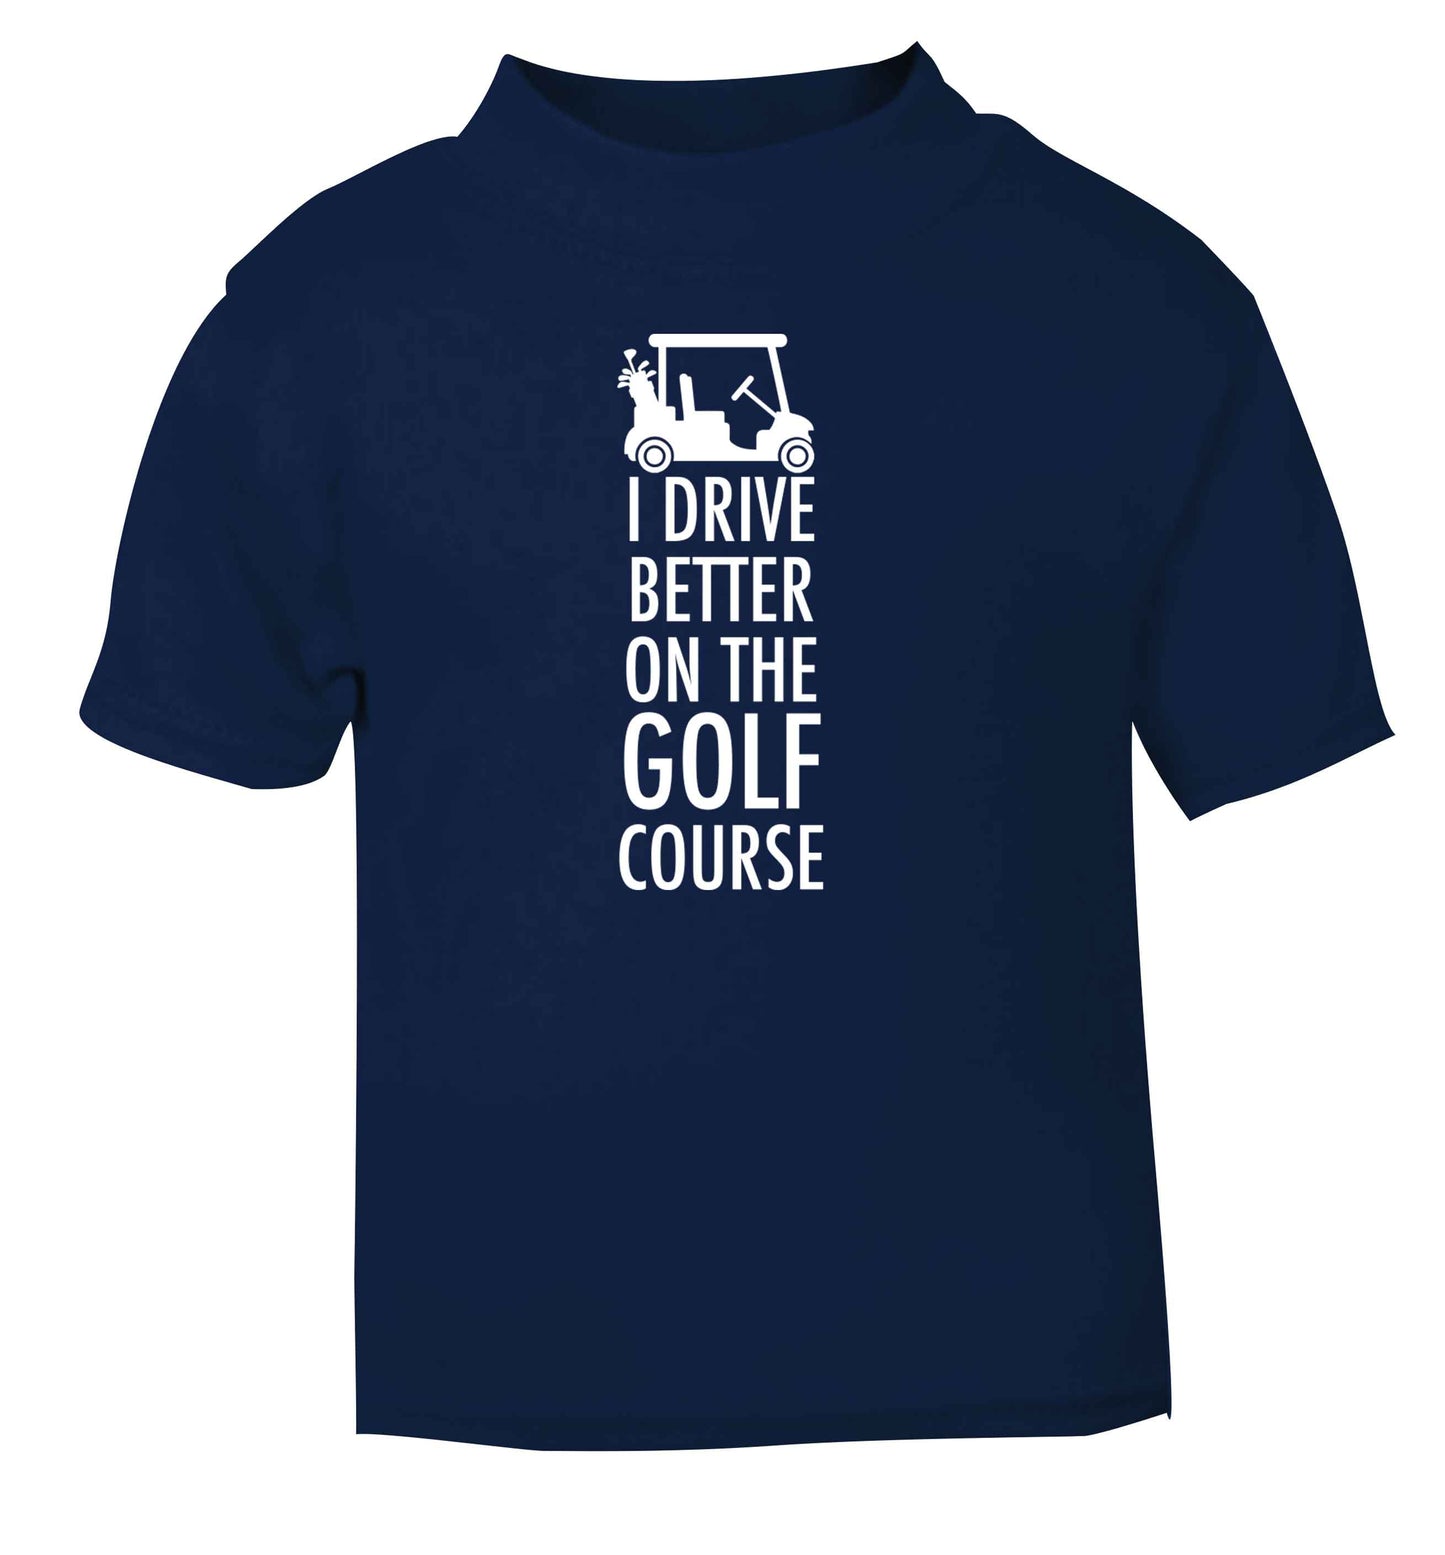 I drive better on the golf course navy Baby Toddler Tshirt 2 Years